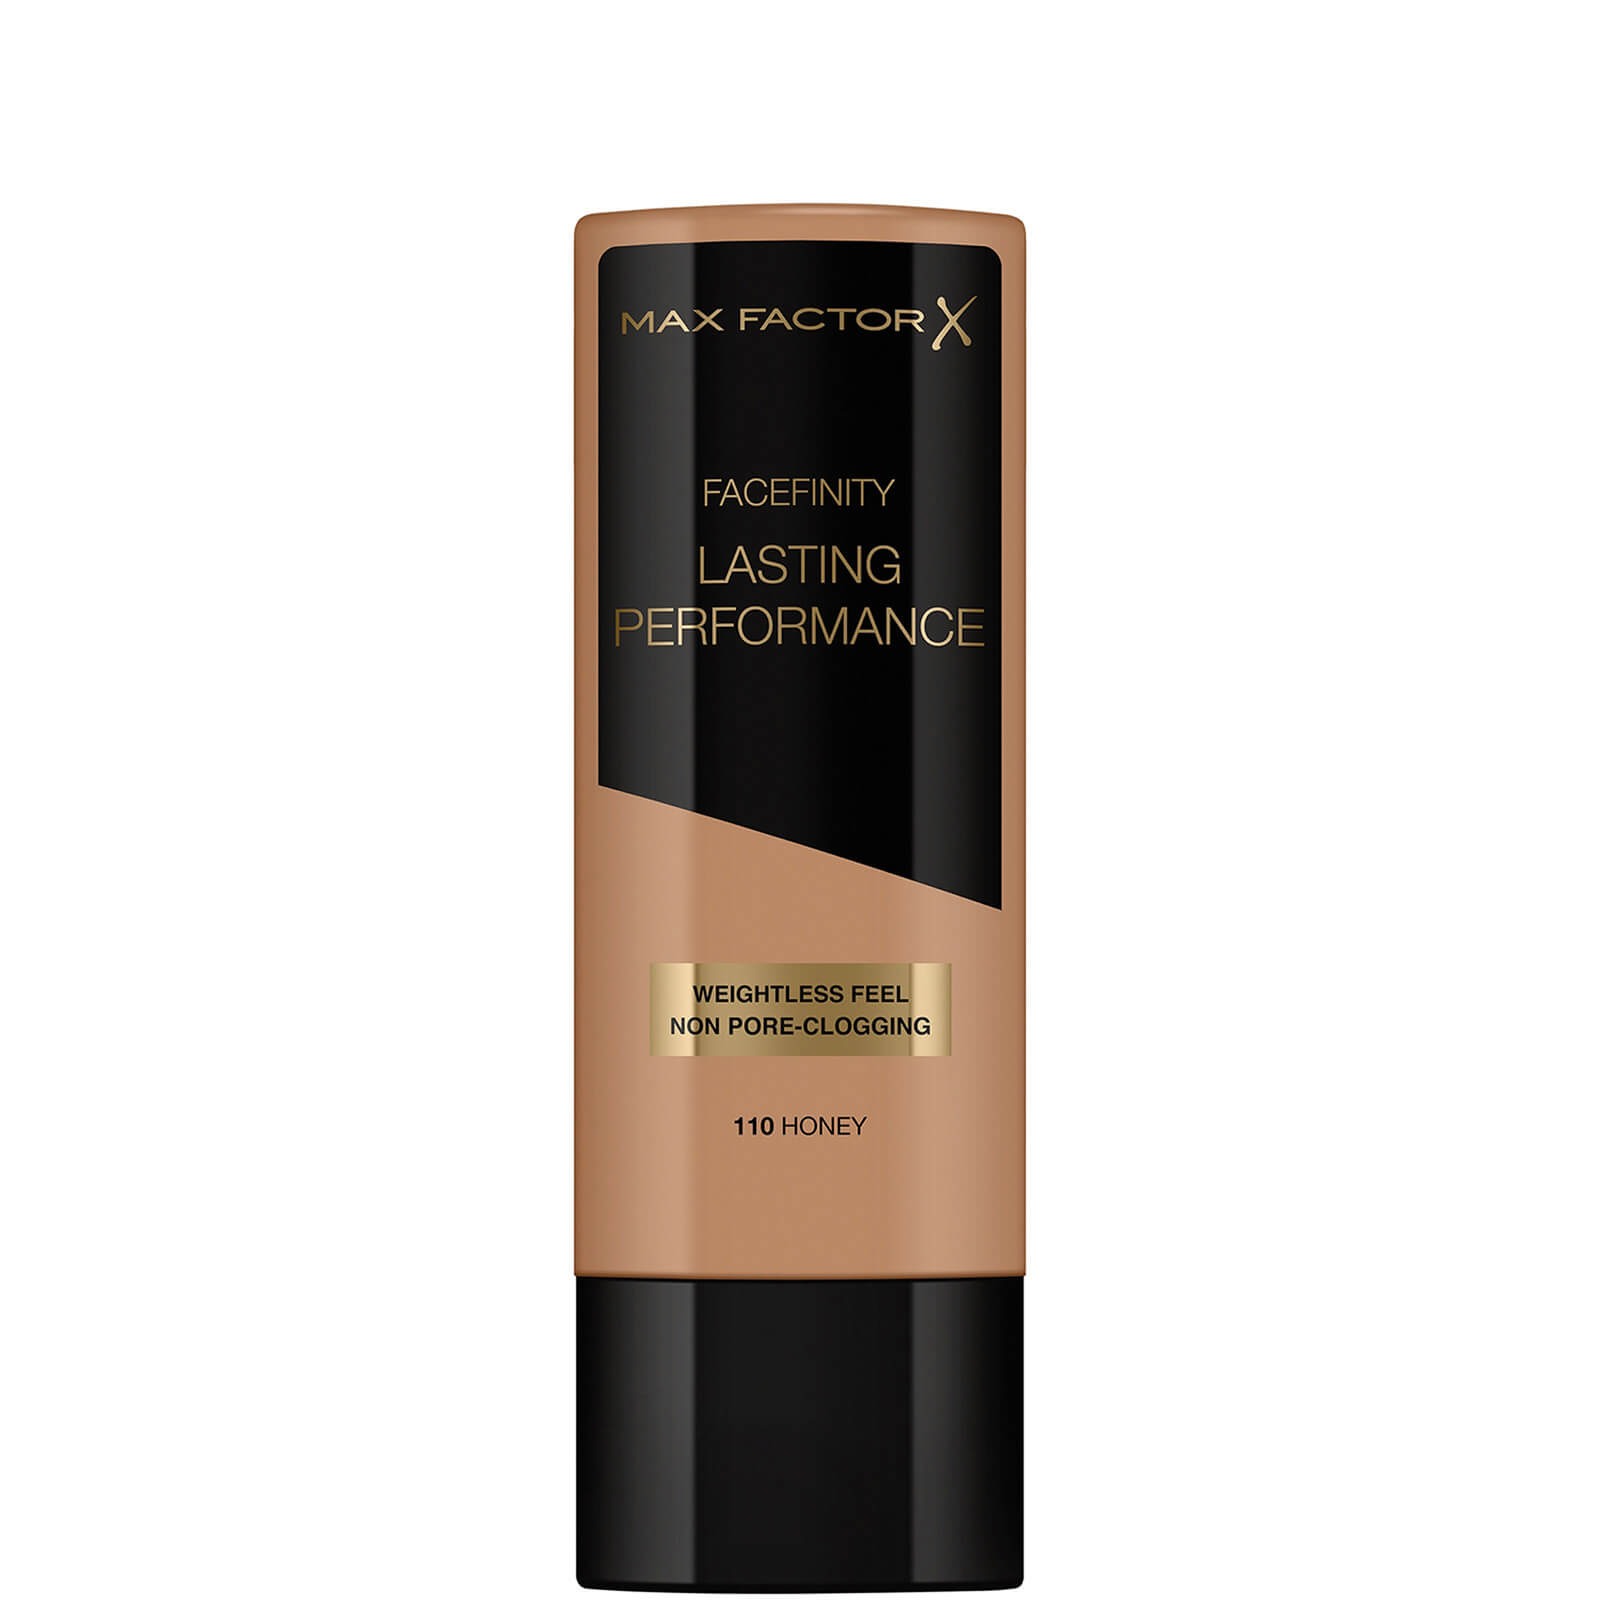 Max Factor Lasting Performance Restage 35g (Various Shades) - 110 Honey